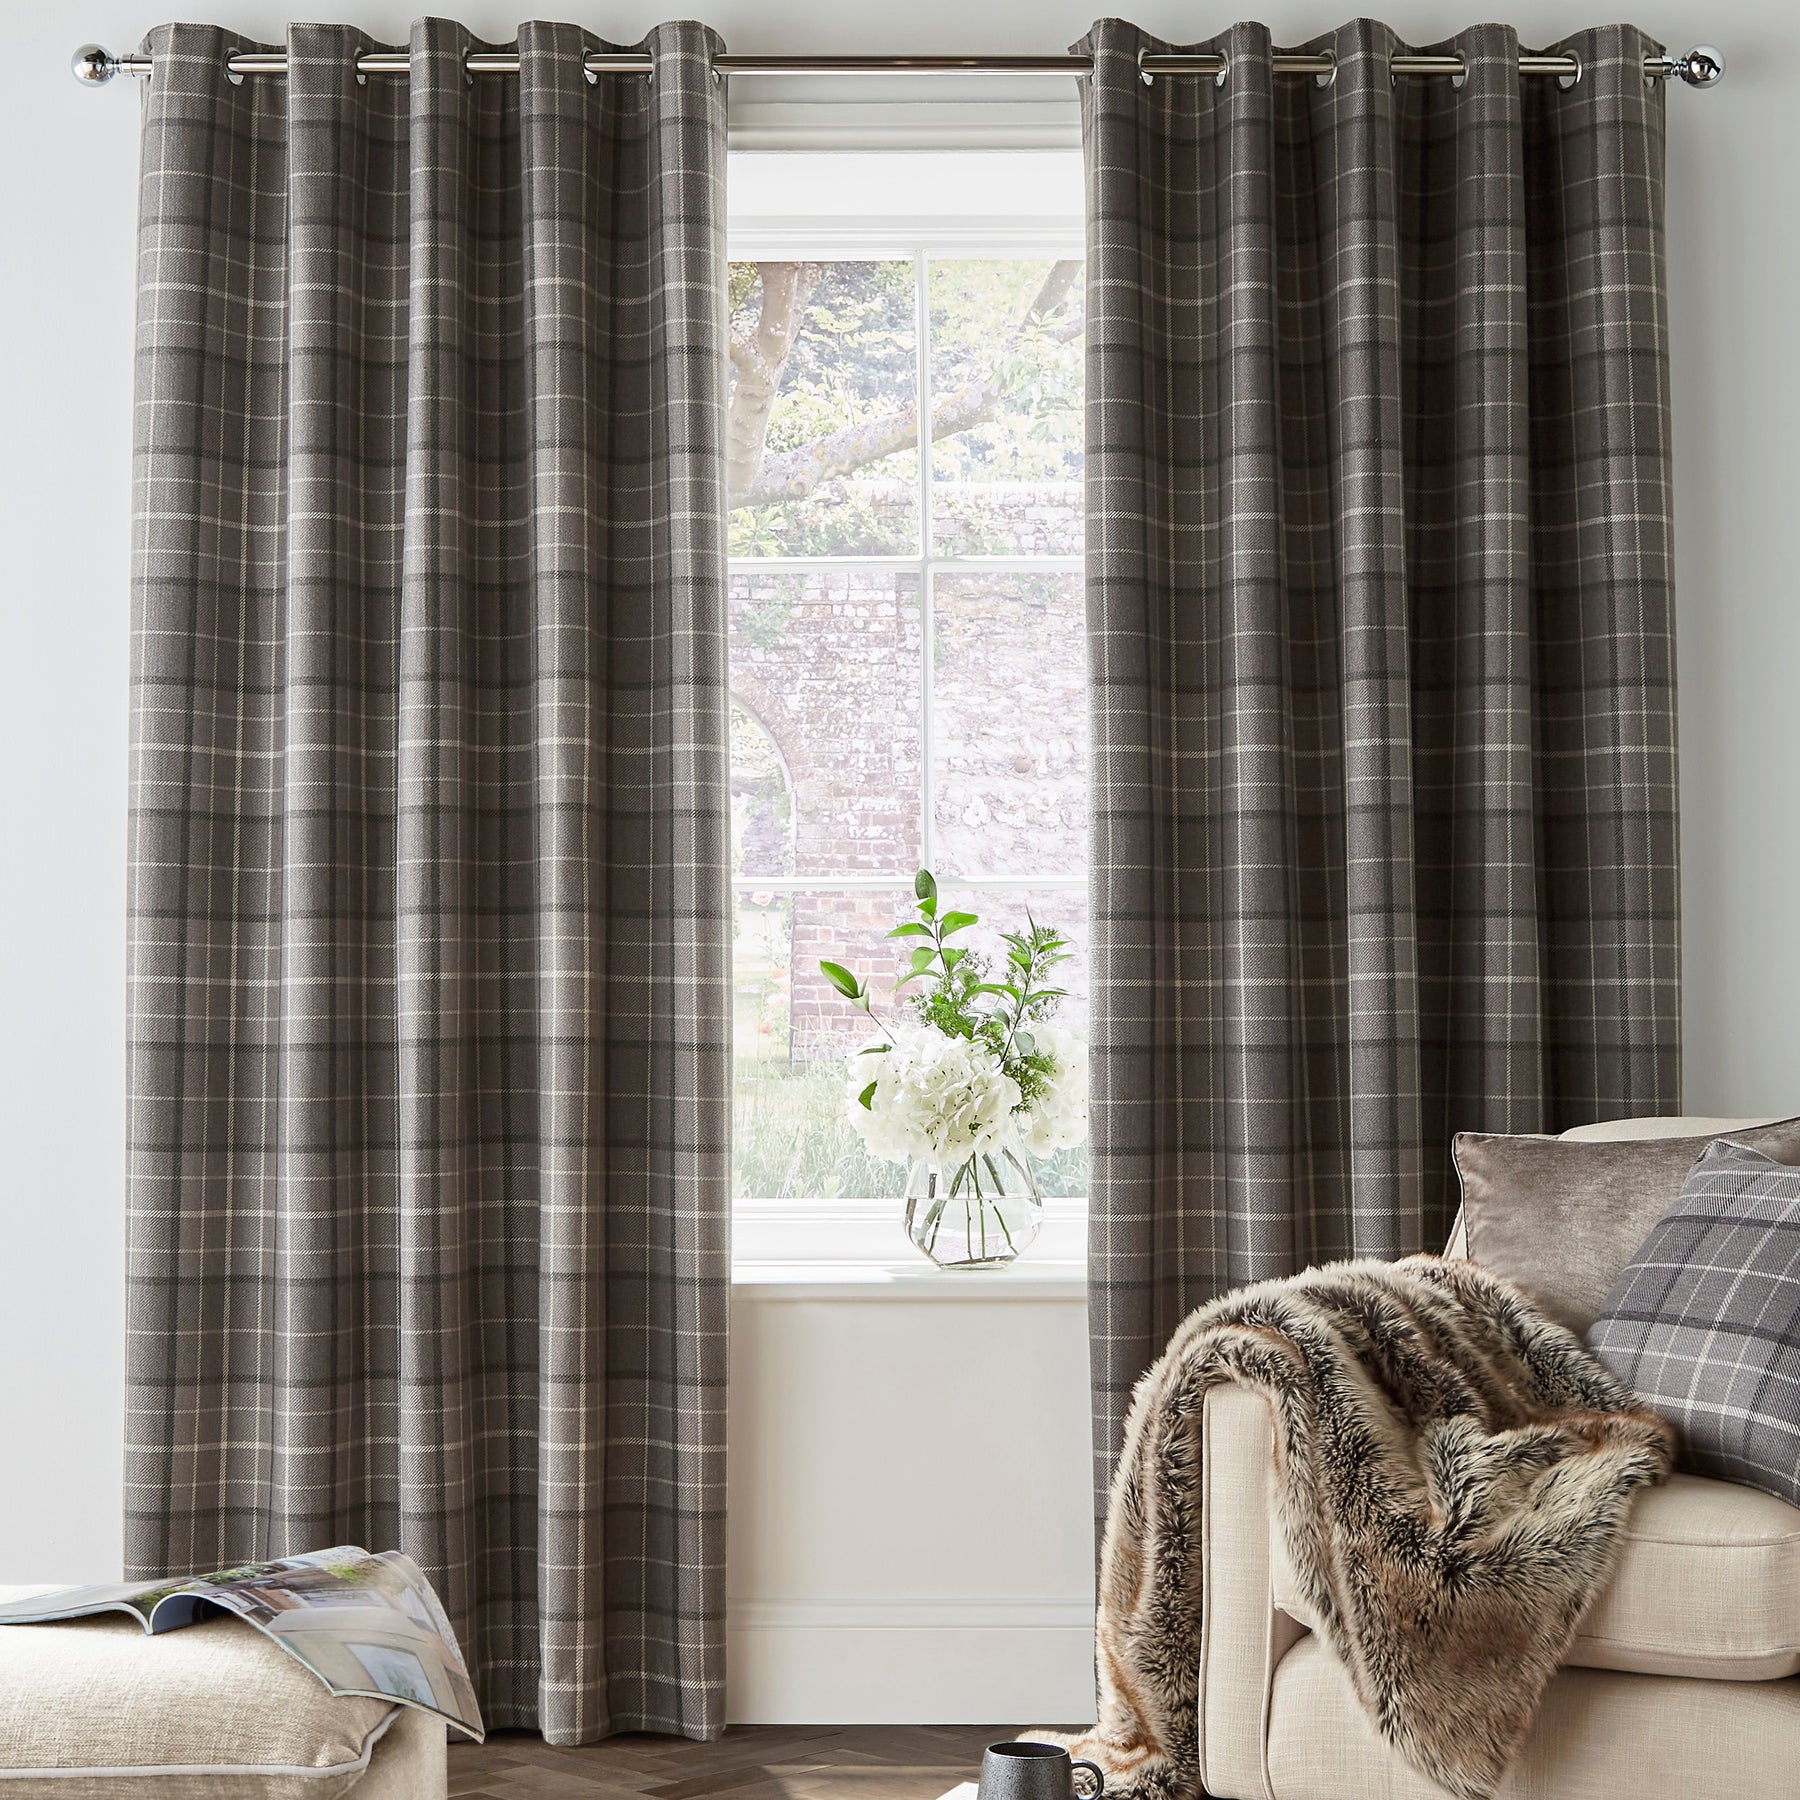 Laura Ashley Alfriston Check Ready Made Eyelet Blackout Curtains Pale Charcoal